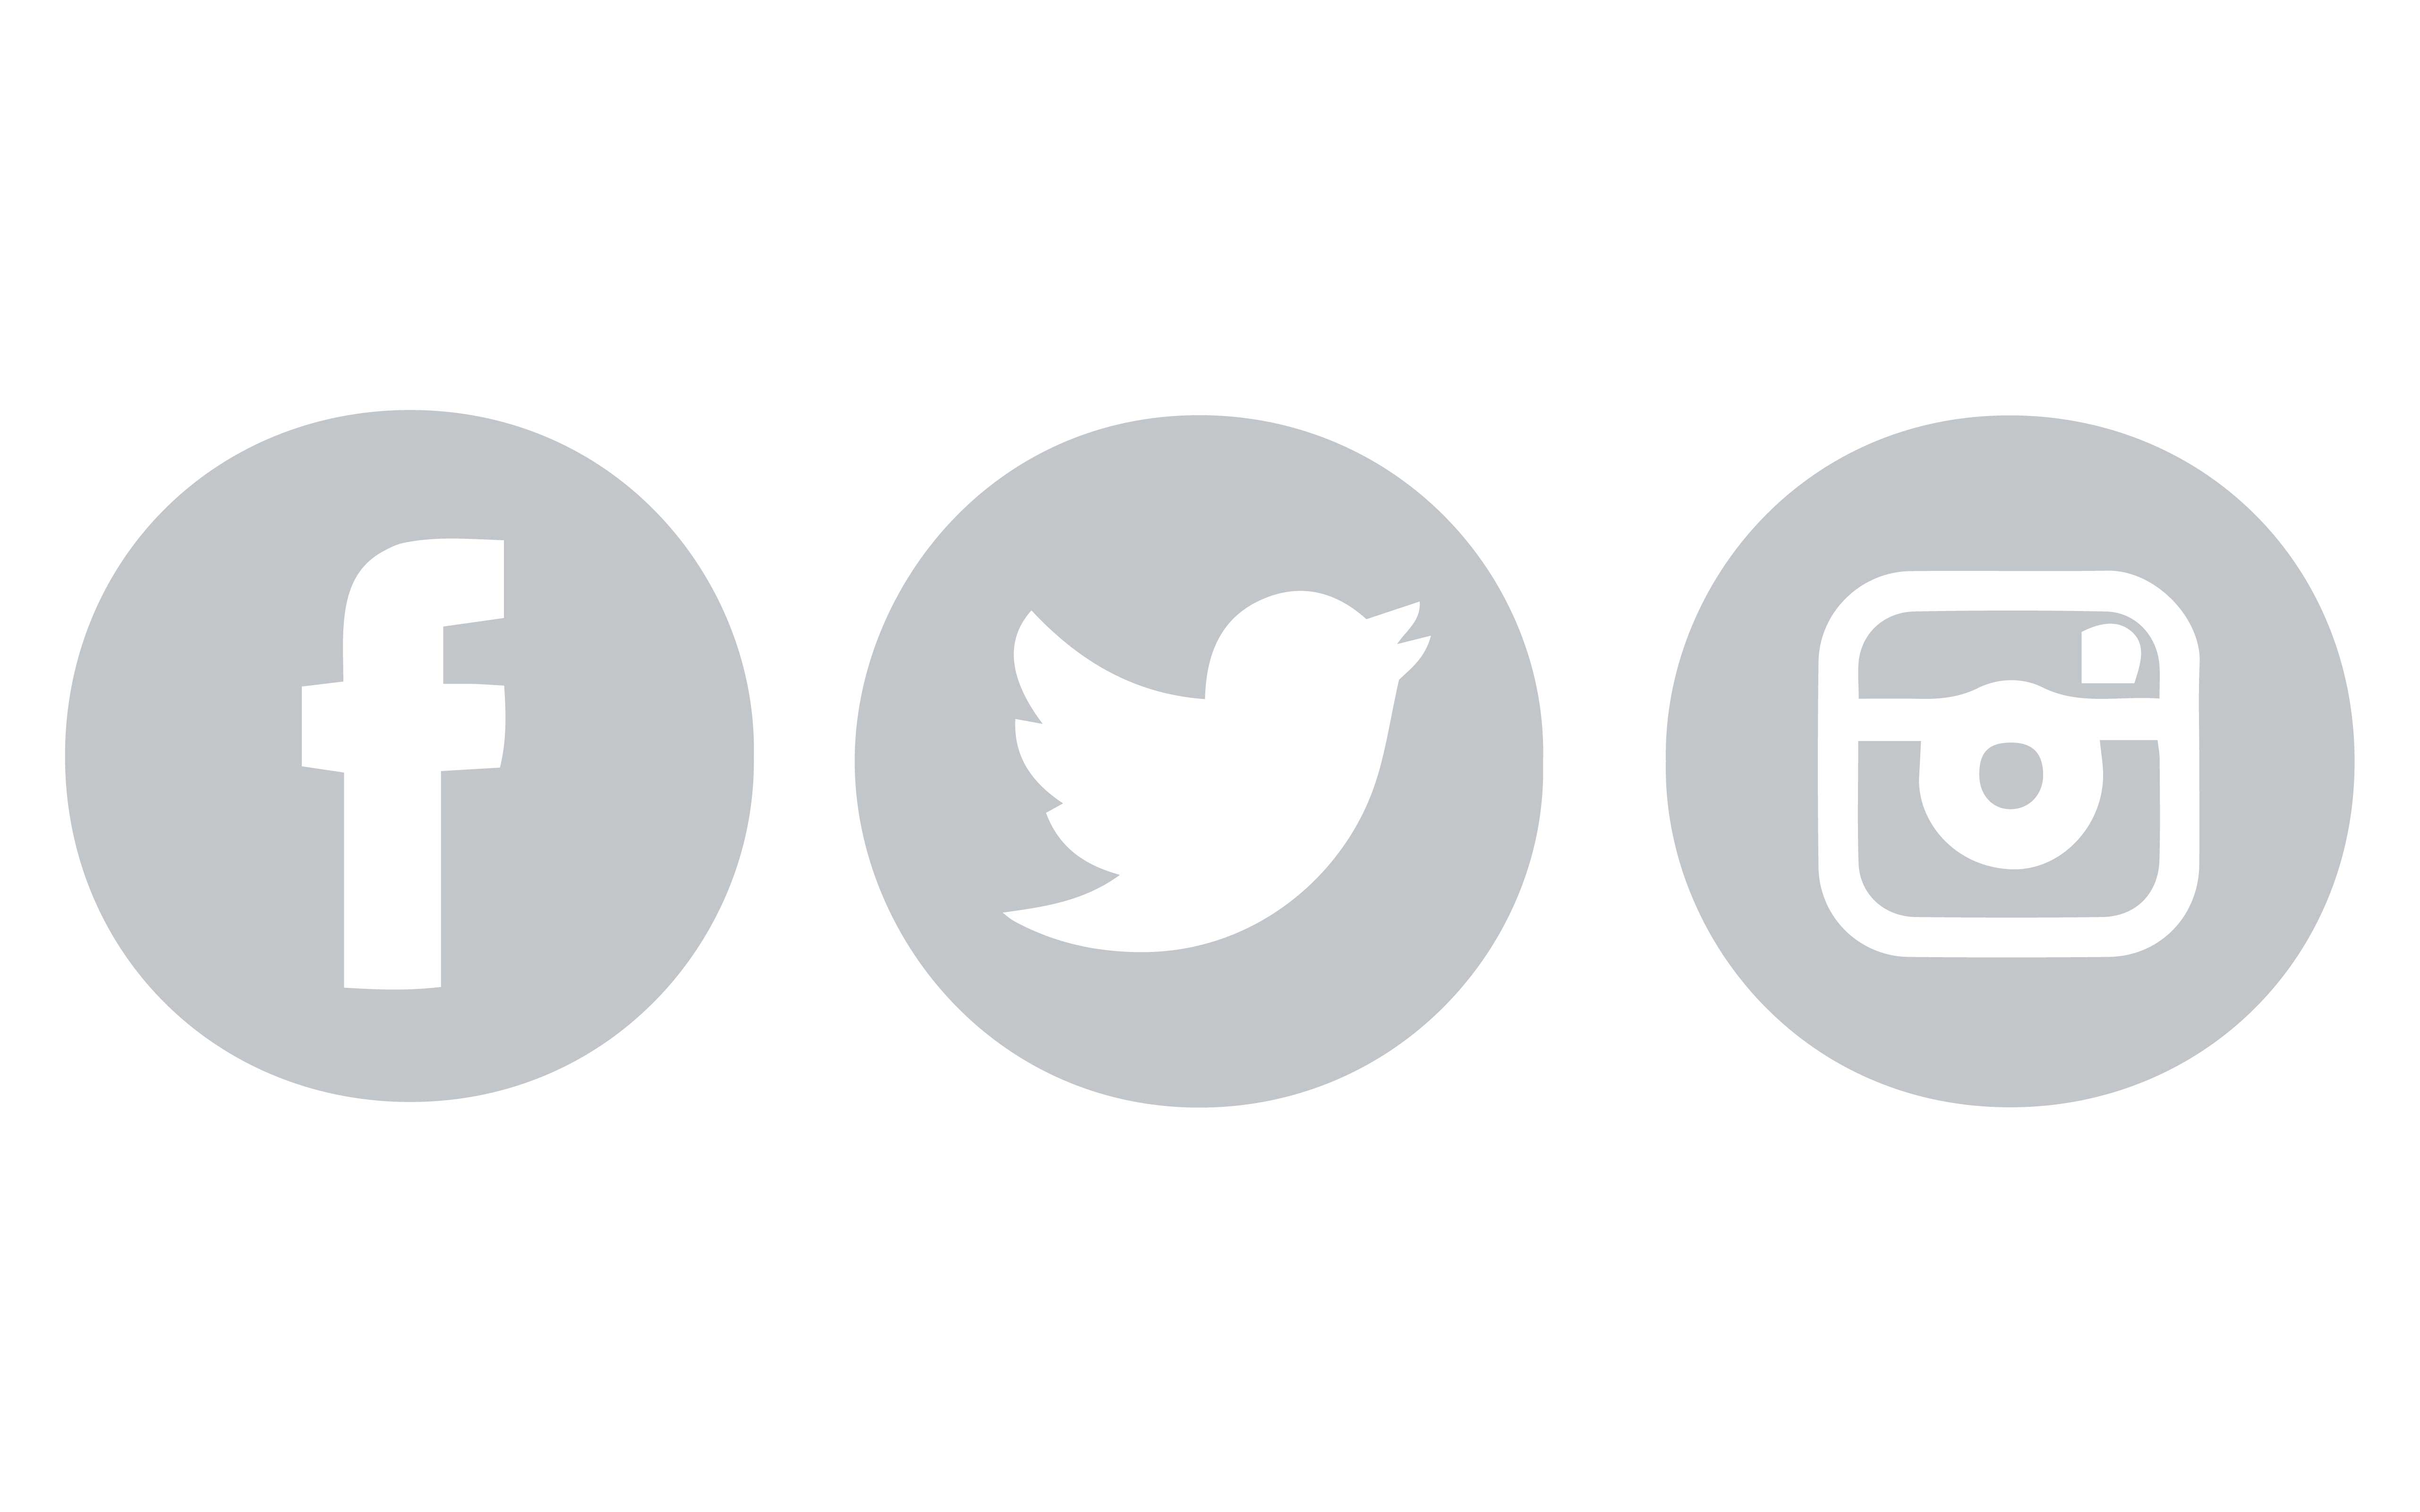 Svg Twitter Icon #76 - Free Icons and PNG Backgrounds